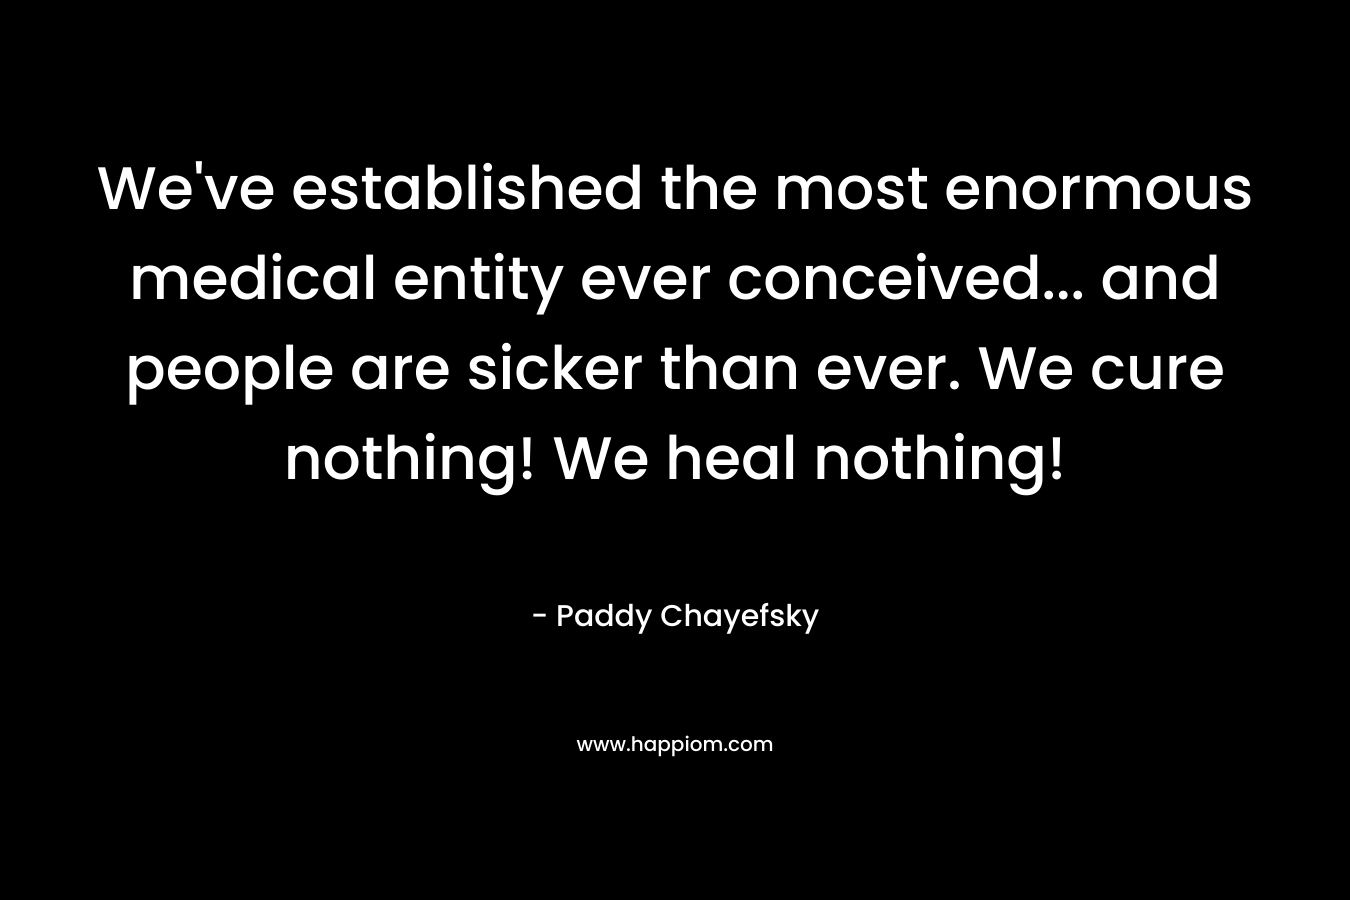 We've established the most enormous medical entity ever conceived... and people are sicker than ever. We cure nothing! We heal nothing!